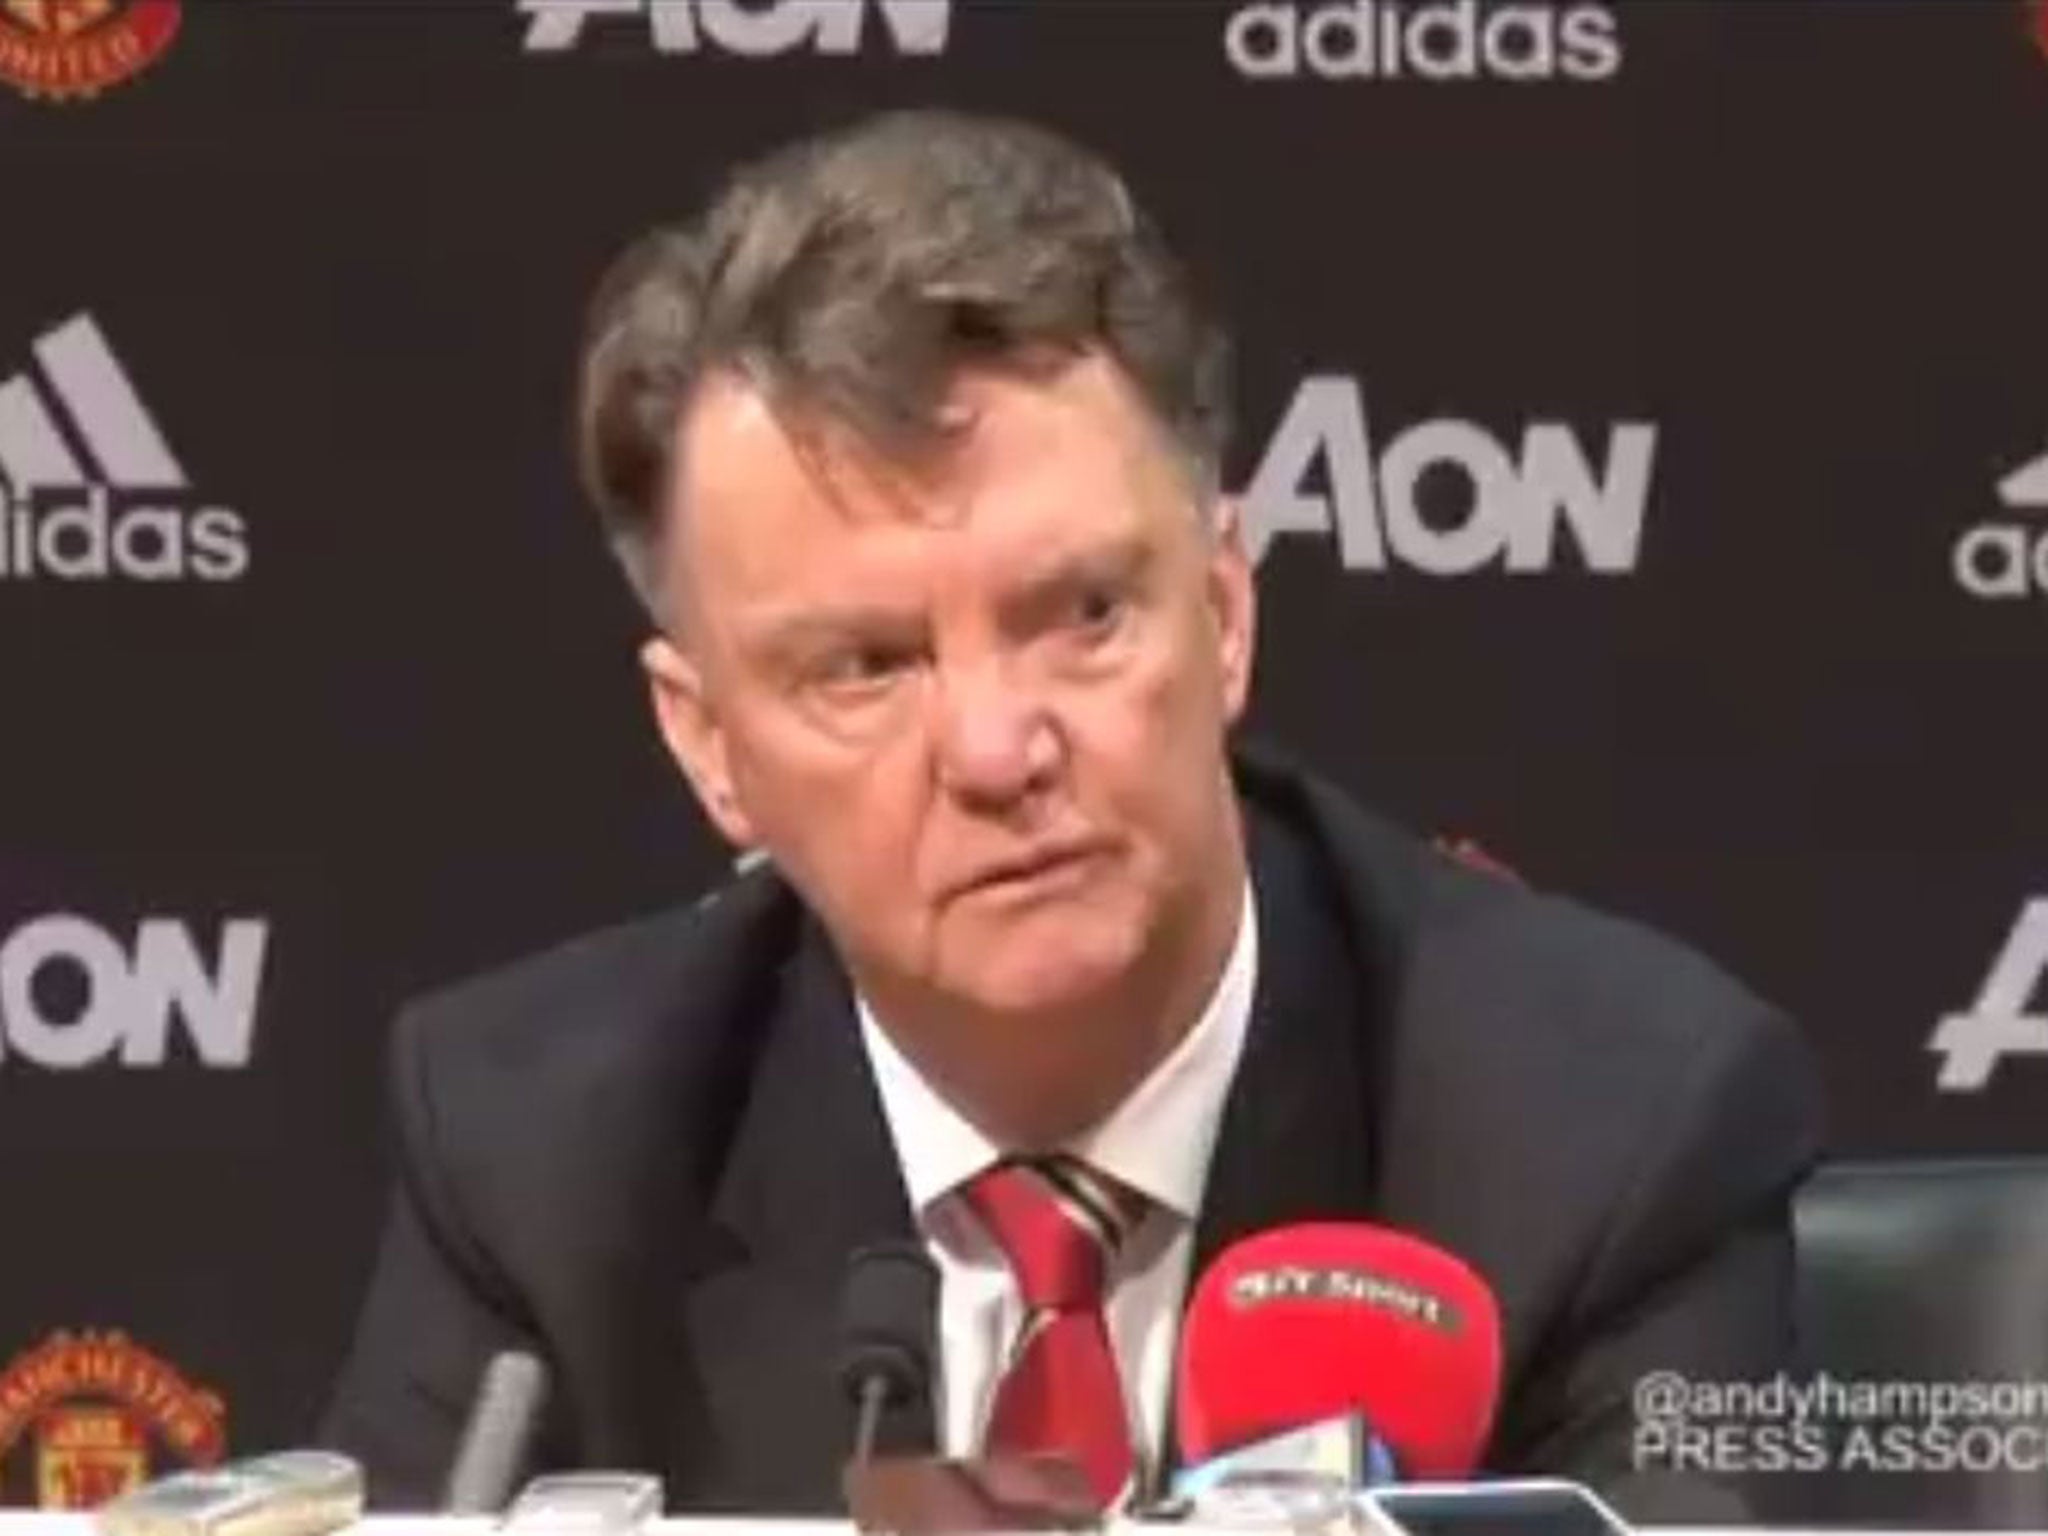 Manchester United manager Louis van Gaal during his post-match press conference on Monday